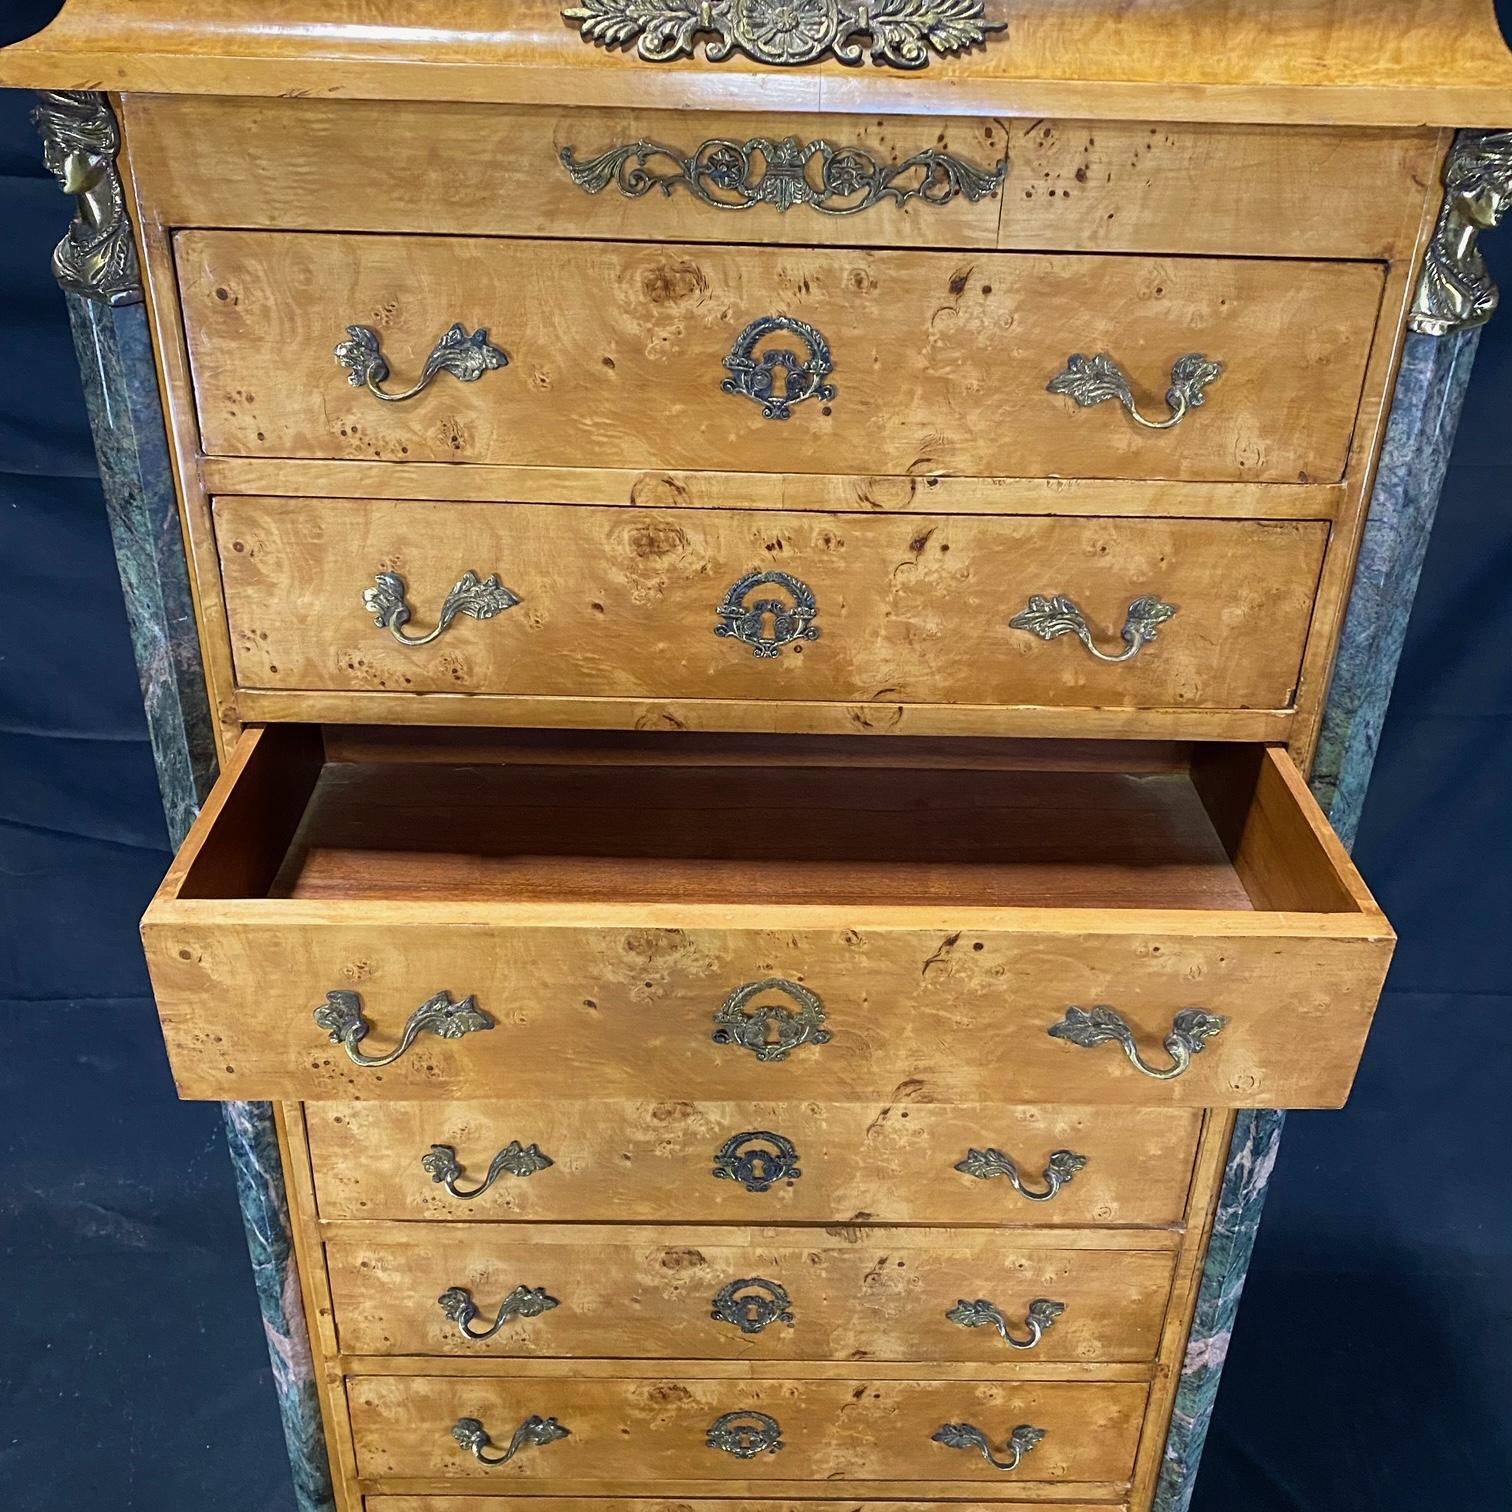 A French Louis XVI style lingerie or linen chest from the early 20th century having a semainier (or semaniere) design of eight drawers, typically used for storing lingerie or linens. The top of the burled walnut chest is a beautiful forest green